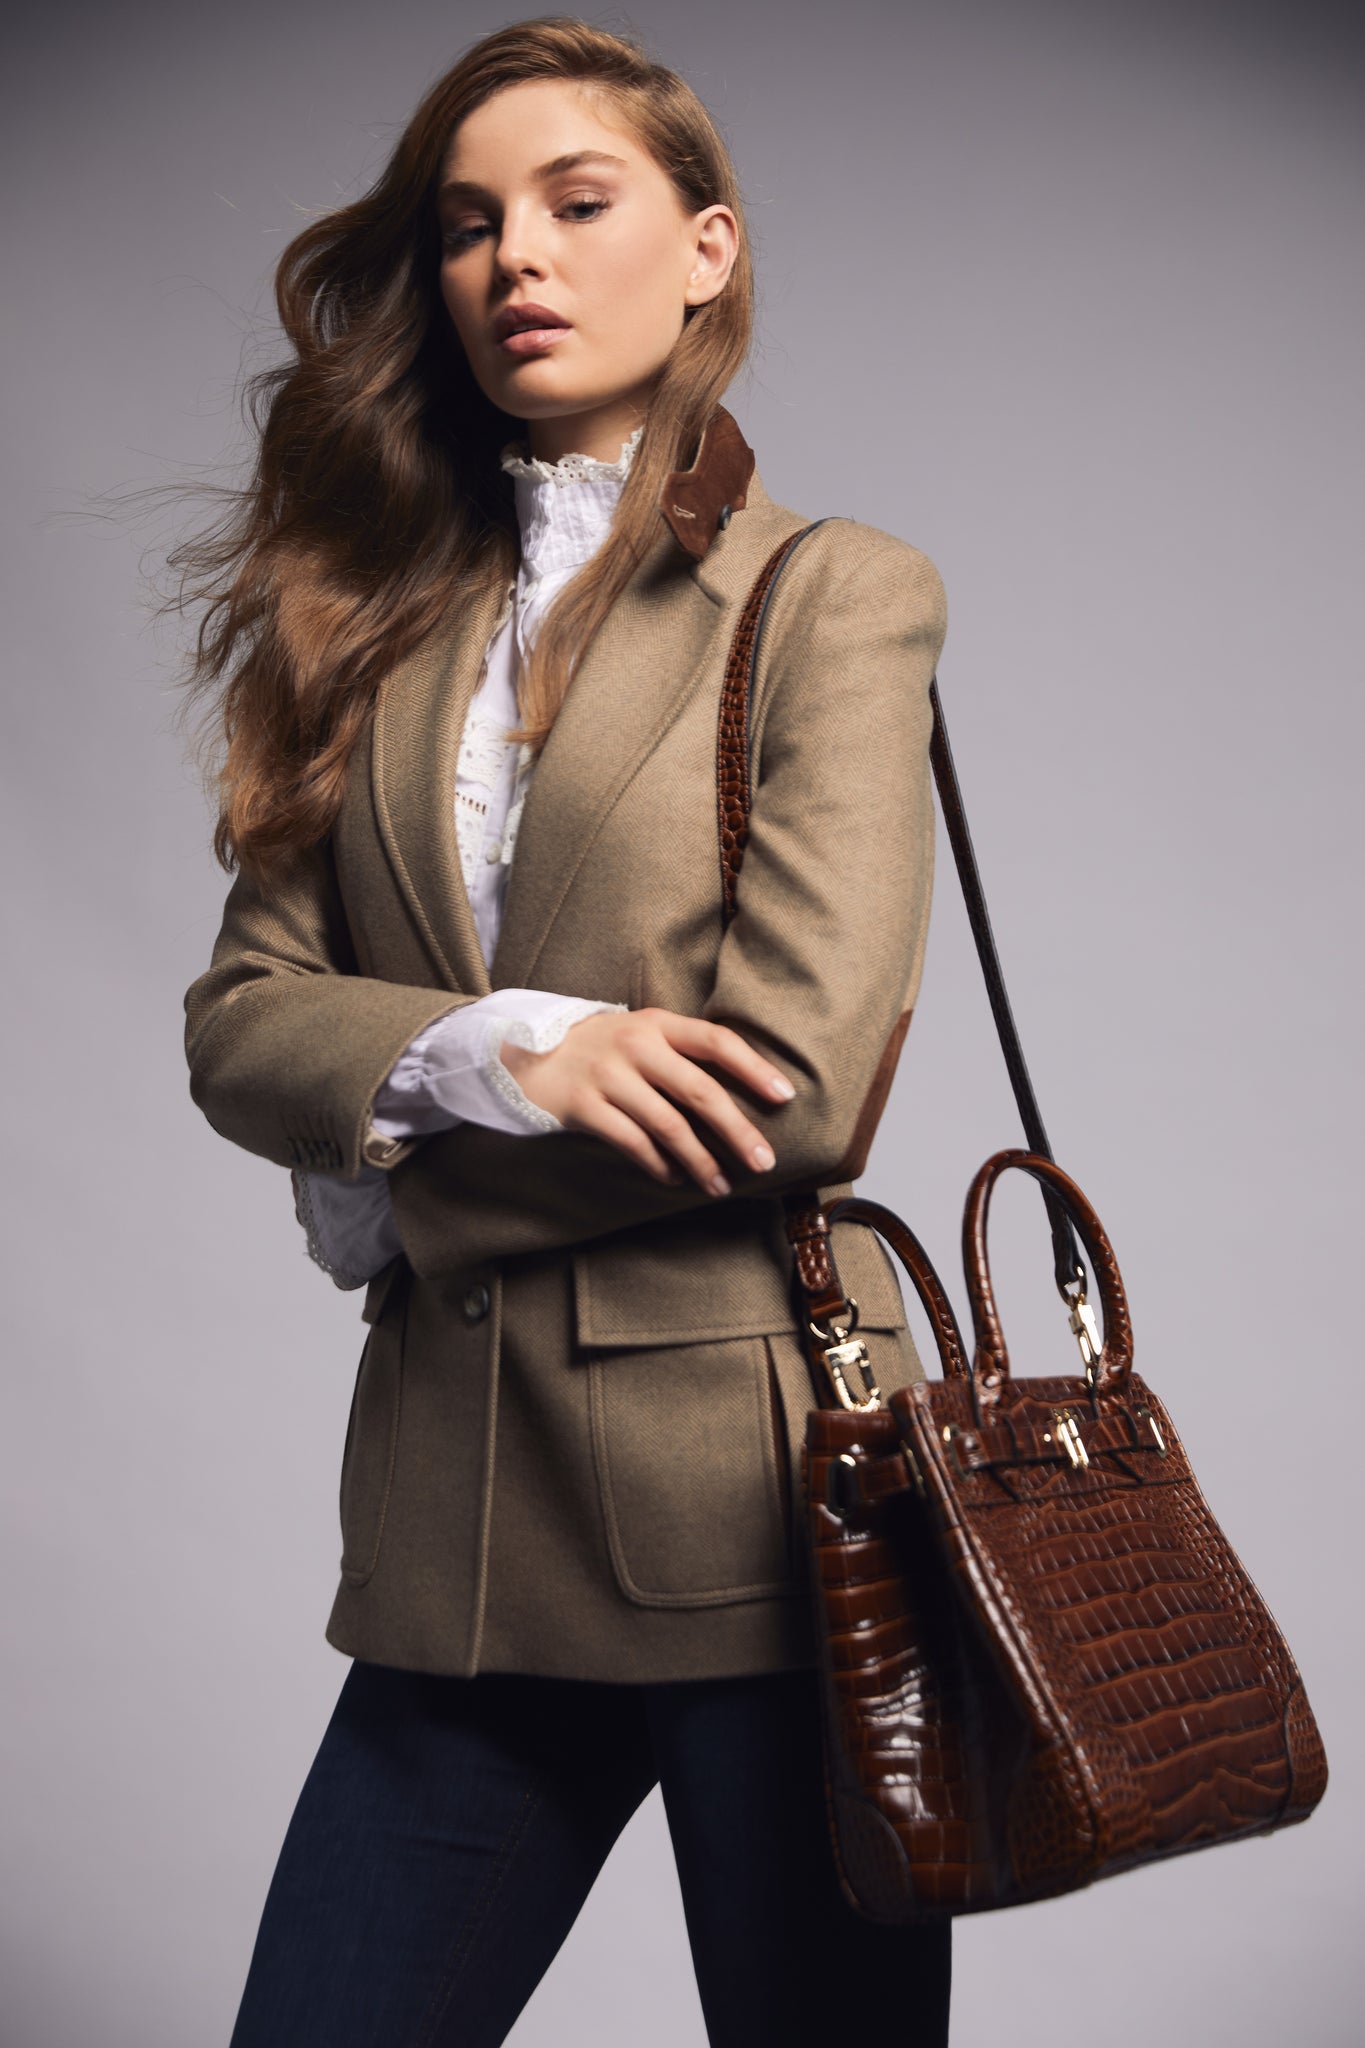 womens tailored fit single breasted blazer in camel herringbone with patch pockets and contrast tan suede elbow patches and underside collar worn with white shirt and tan tote bag